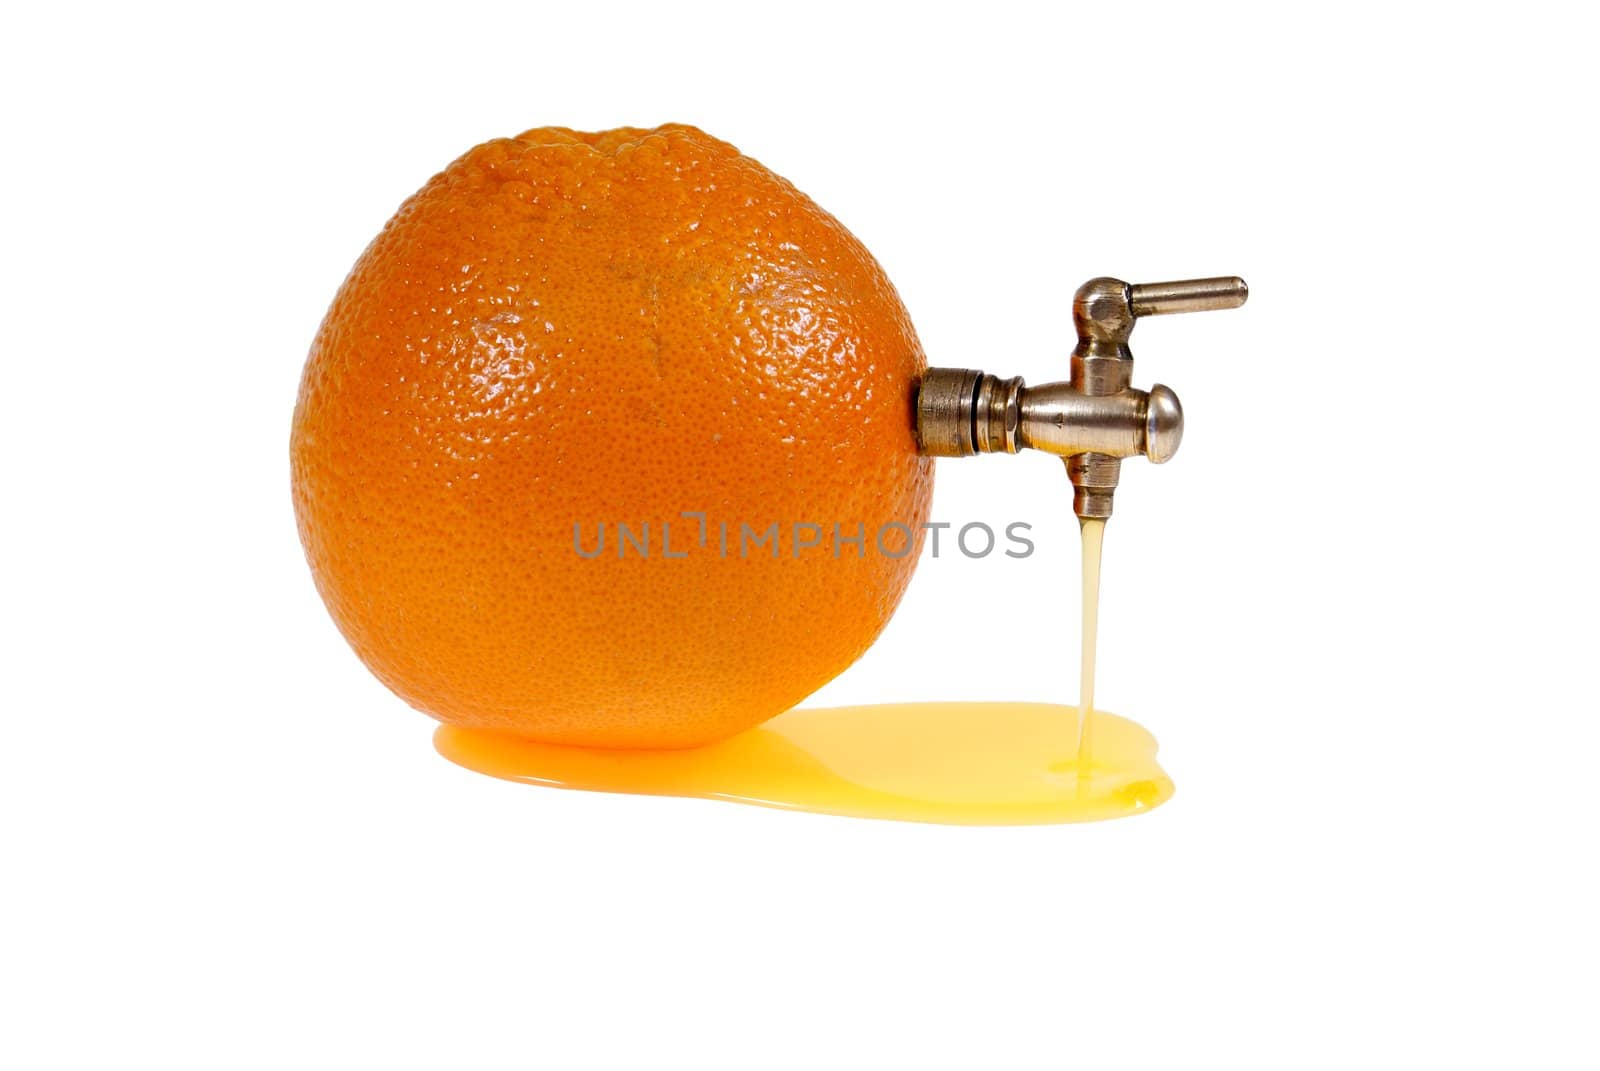 orange with tap and juice flow isolated on white background